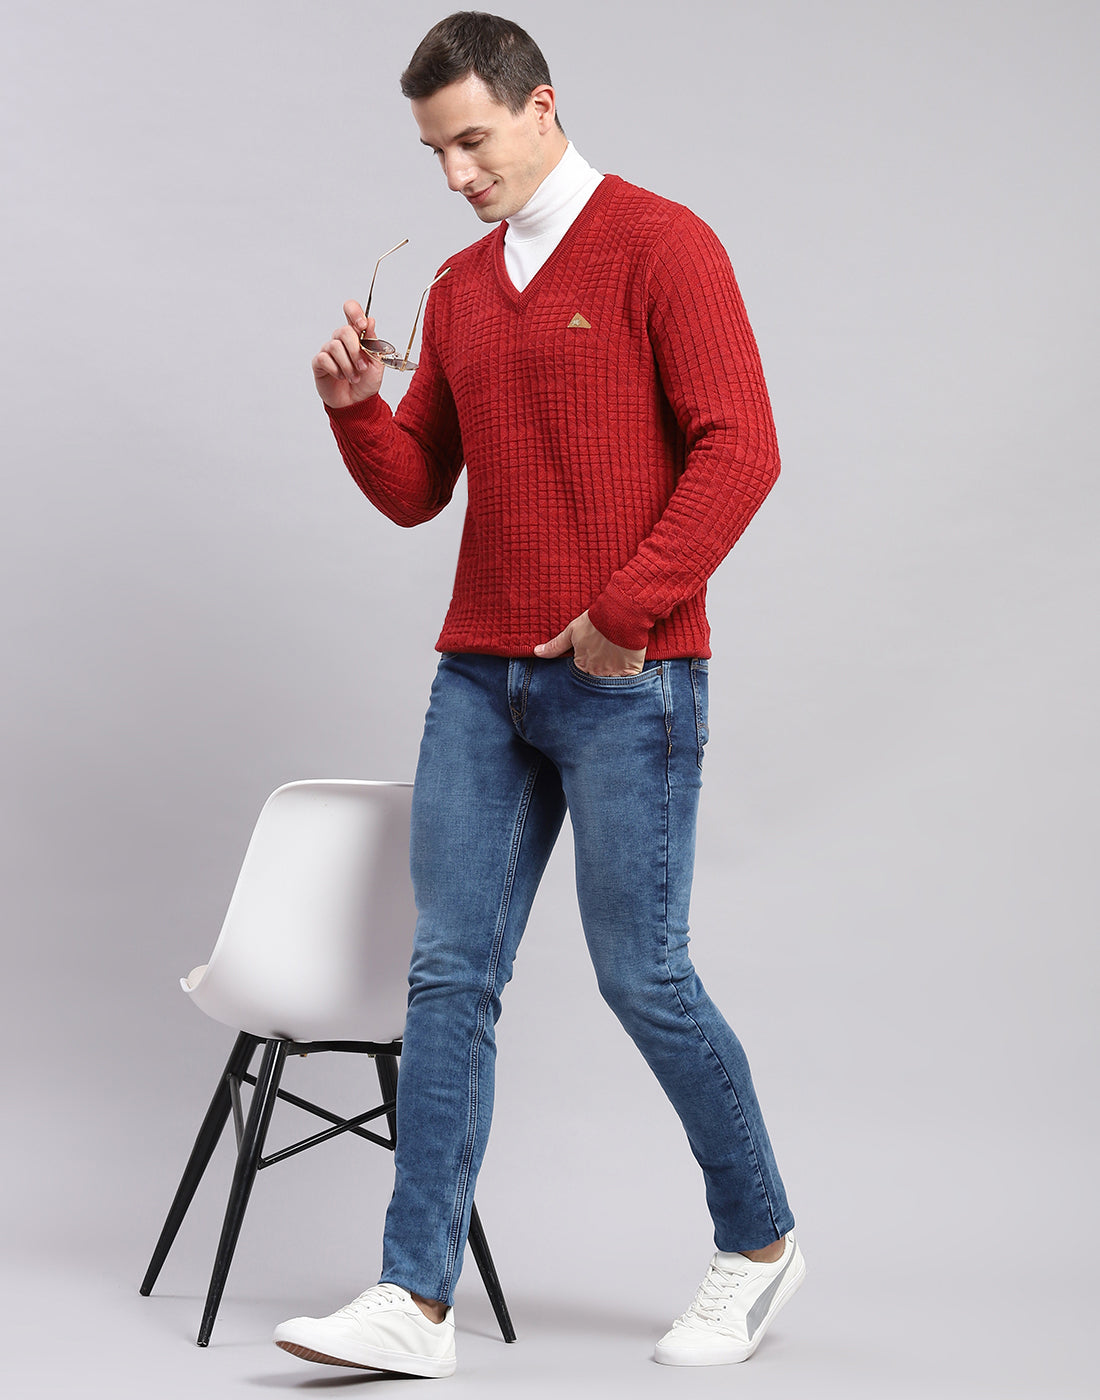 Red Sweater Outfit Ideas For Men, Sweater Outfit Ideas For Men